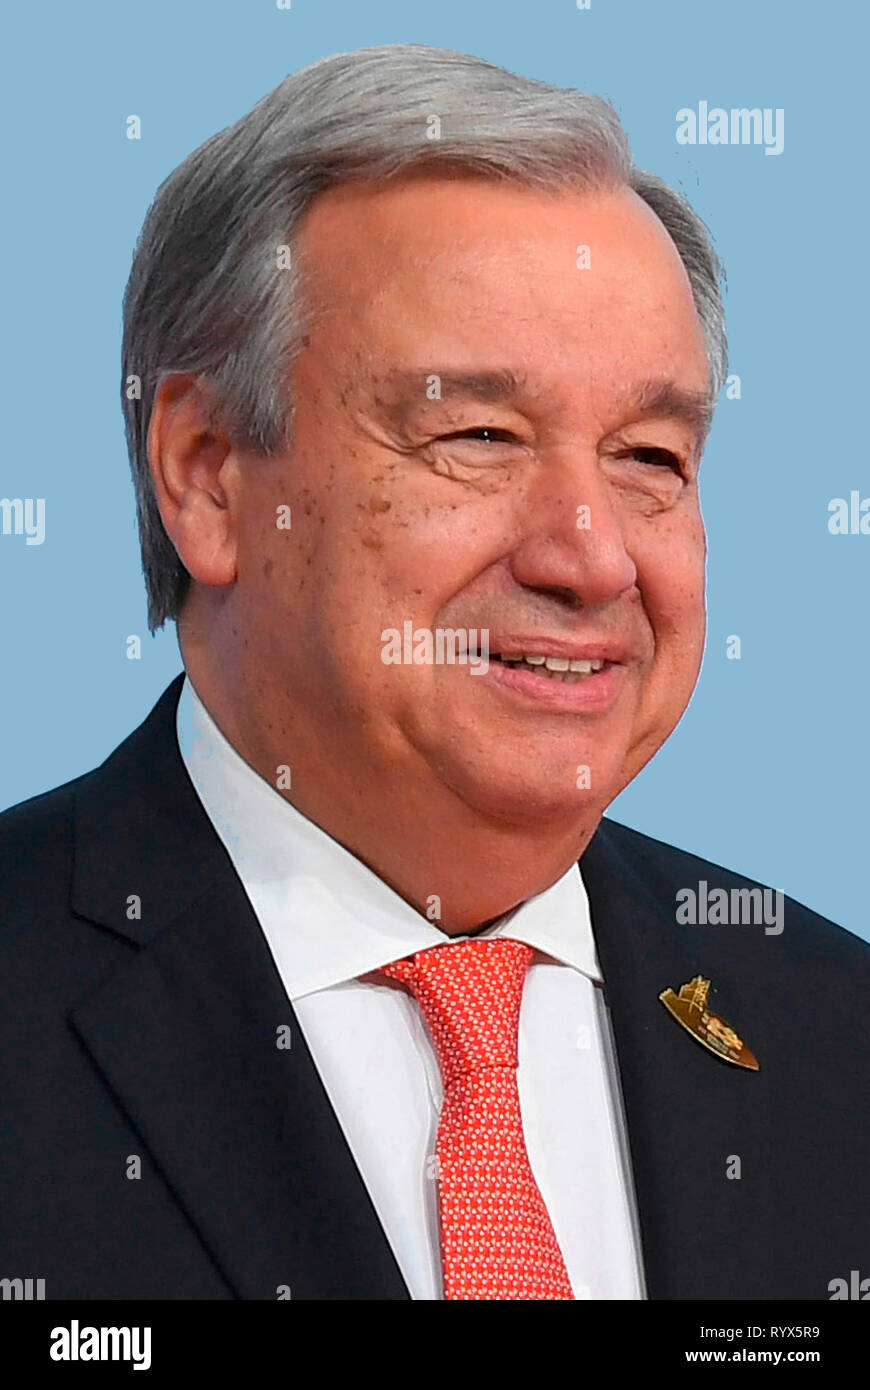 Antonio Guterres 30 04 1949 Diplomat From Portugal And 9th Secretary General Of The United Nations Stock Photo Alamy